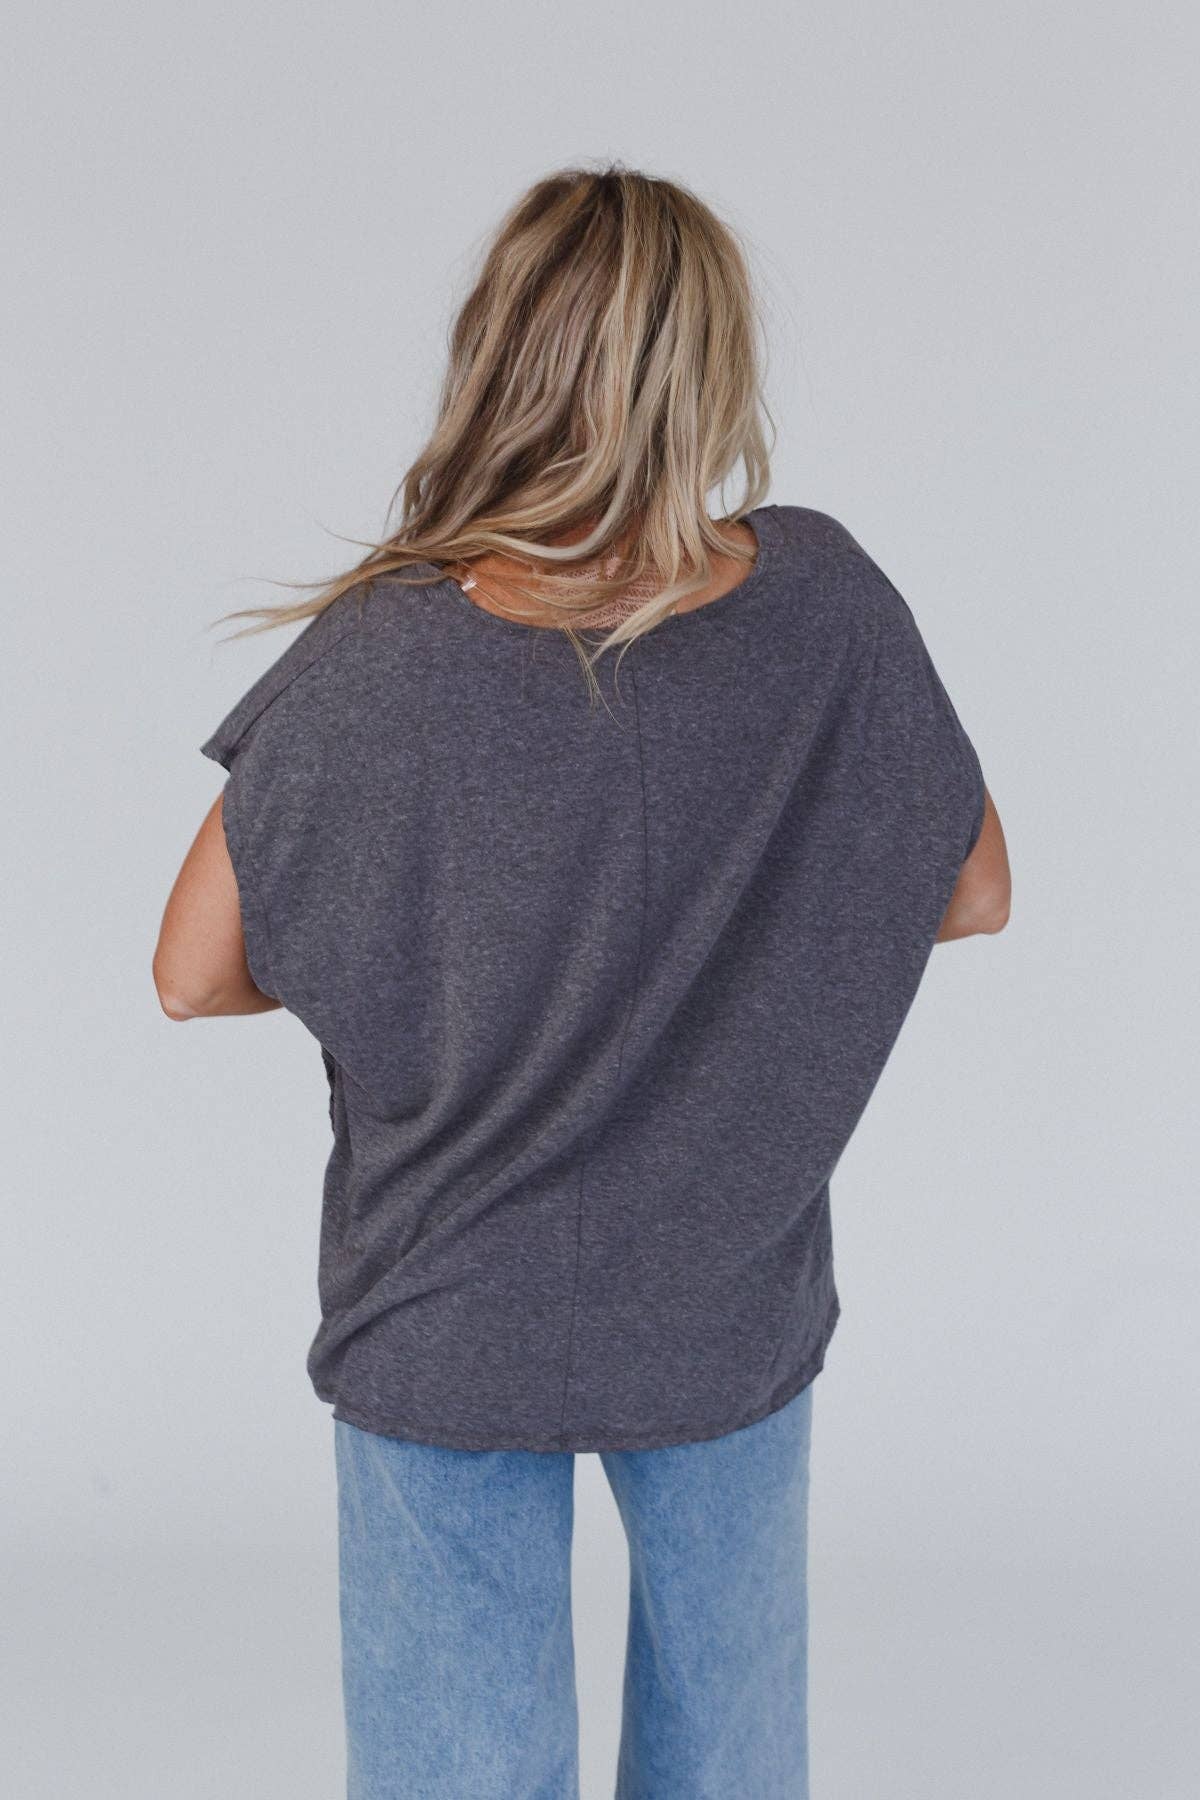 Camden Lace V Neck Top - Charcoal